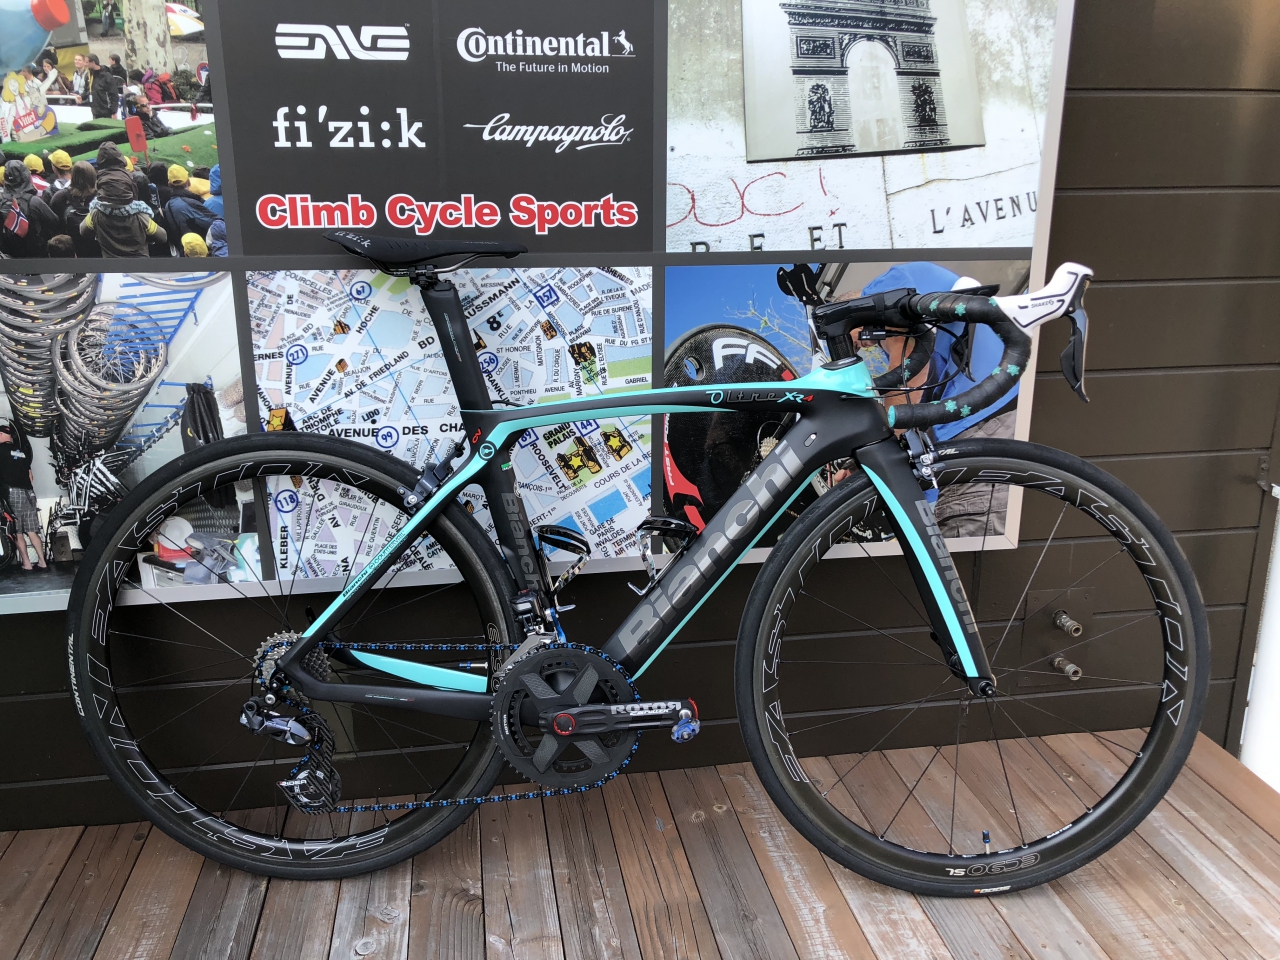 Bianchi Oltre XR4 納車…from Sさま！ | Climb cycle sports